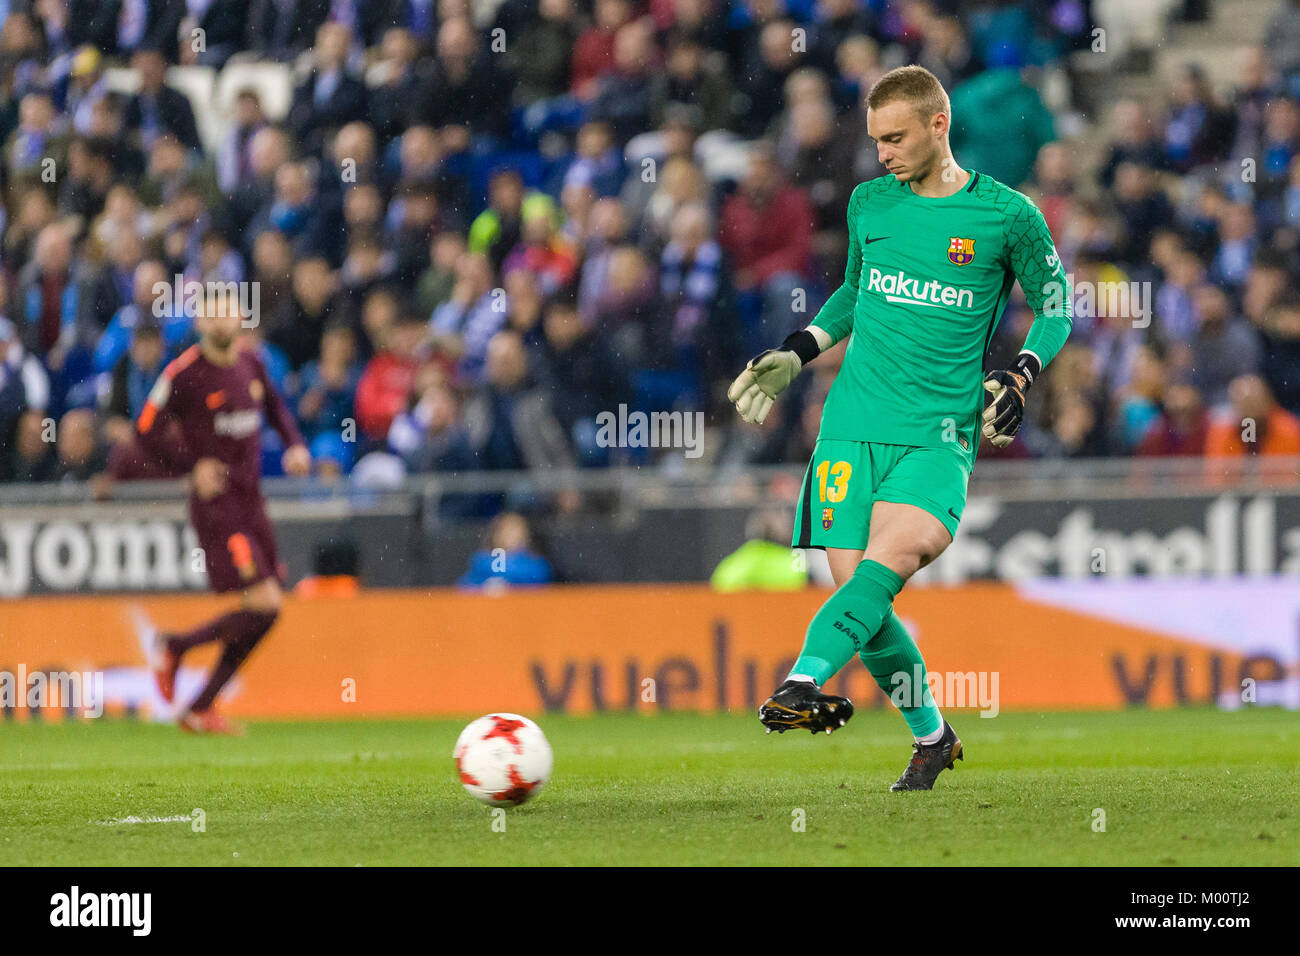 Barcelona, Spain. 17th Jan, 2018. FC Barcelona goalkeeper Jasper Cillessen (13) during the match between RCD Espanyol v FC Barcelona, for the round of 8(1st leg) of the King's cup, played at RCDE Stadium on 17th January 2018 in Barcelona, Spain. Credit: Gtres Información más Comuniación on line, S.L./Alamy Live News Stock Photo